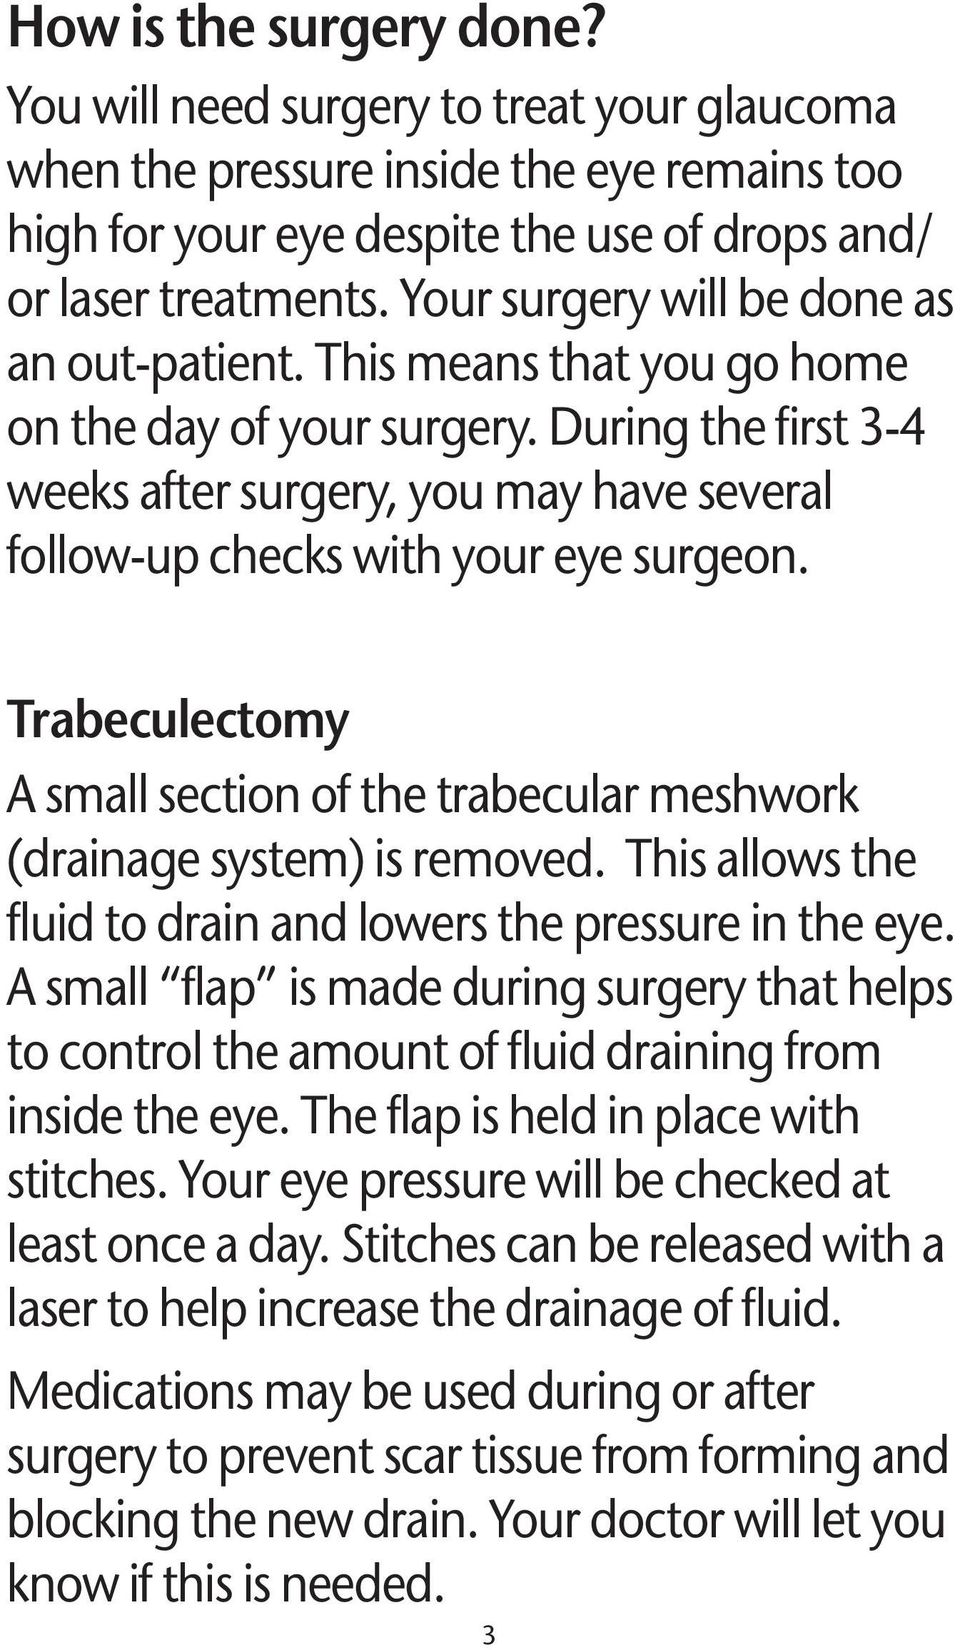 During the first 3-4 weeks after surgery, you may have several follow-up checks with your eye surgeon. Trabeculectomy A small section of the trabecular meshwork (drainage system) is removed.